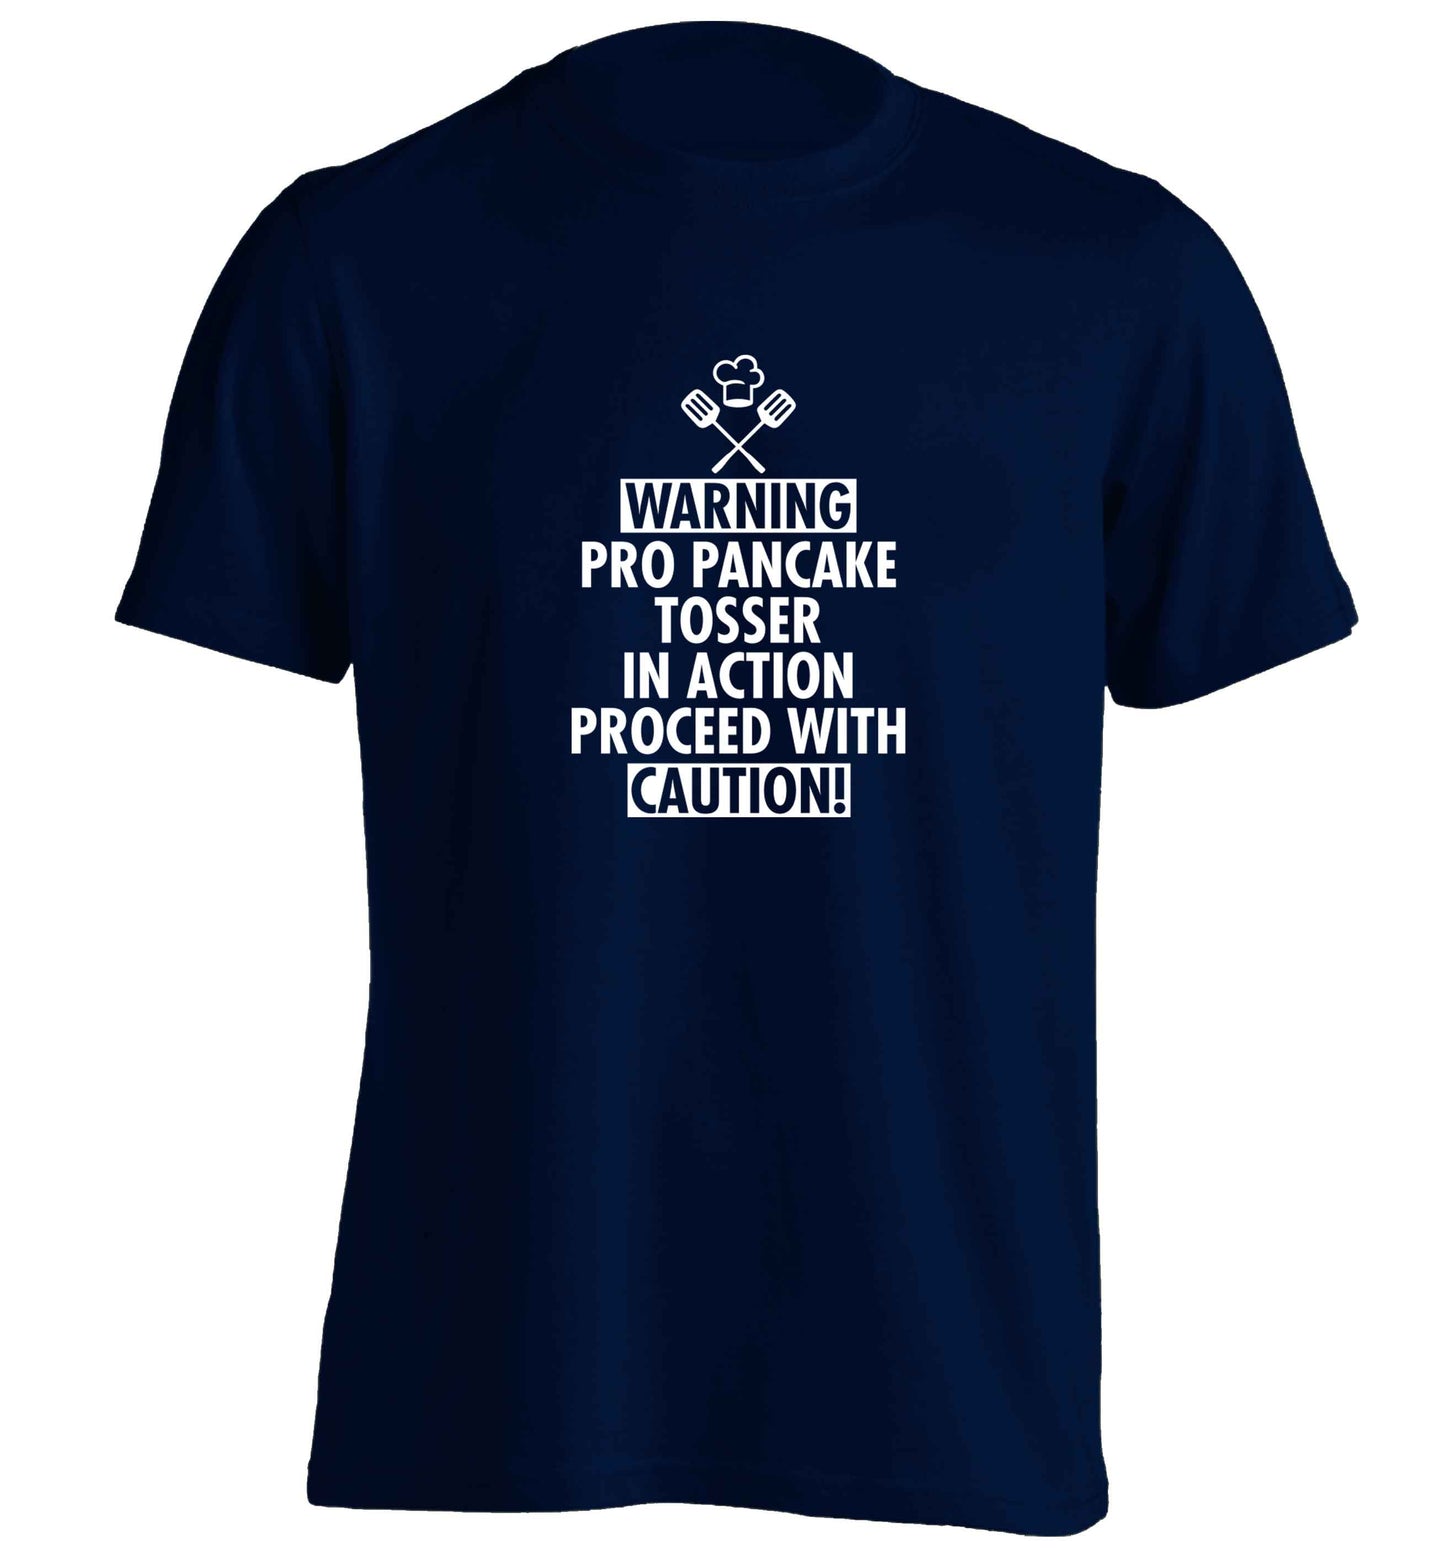 Warning pro pancake tosser in action proceed with caution adults unisex navy Tshirt 2XL